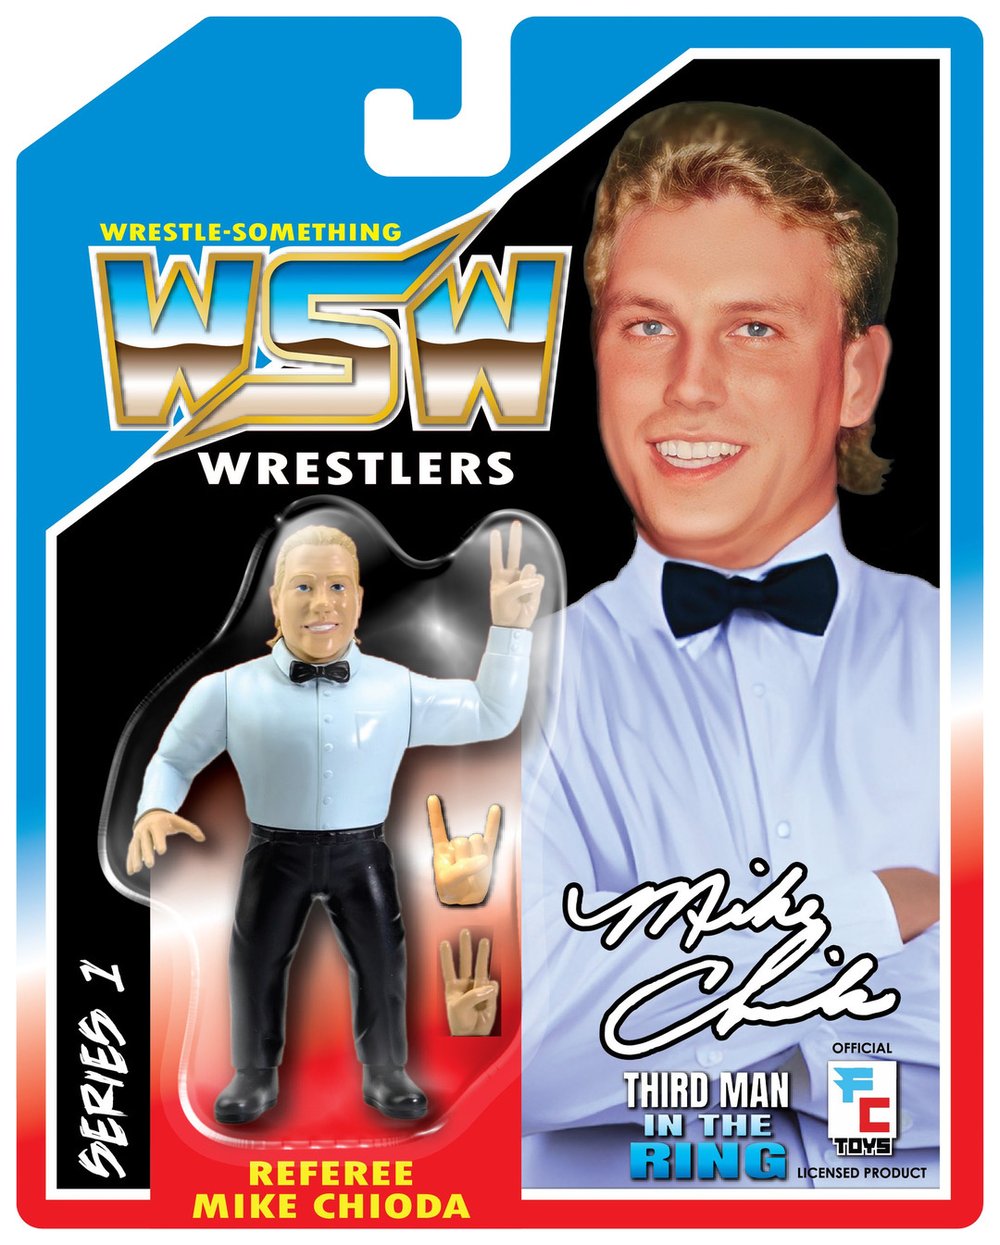  *pre order* REFEREE MIKE CHIODA WRESTLE-Something Wrestlers series 1 VARIANT retro card